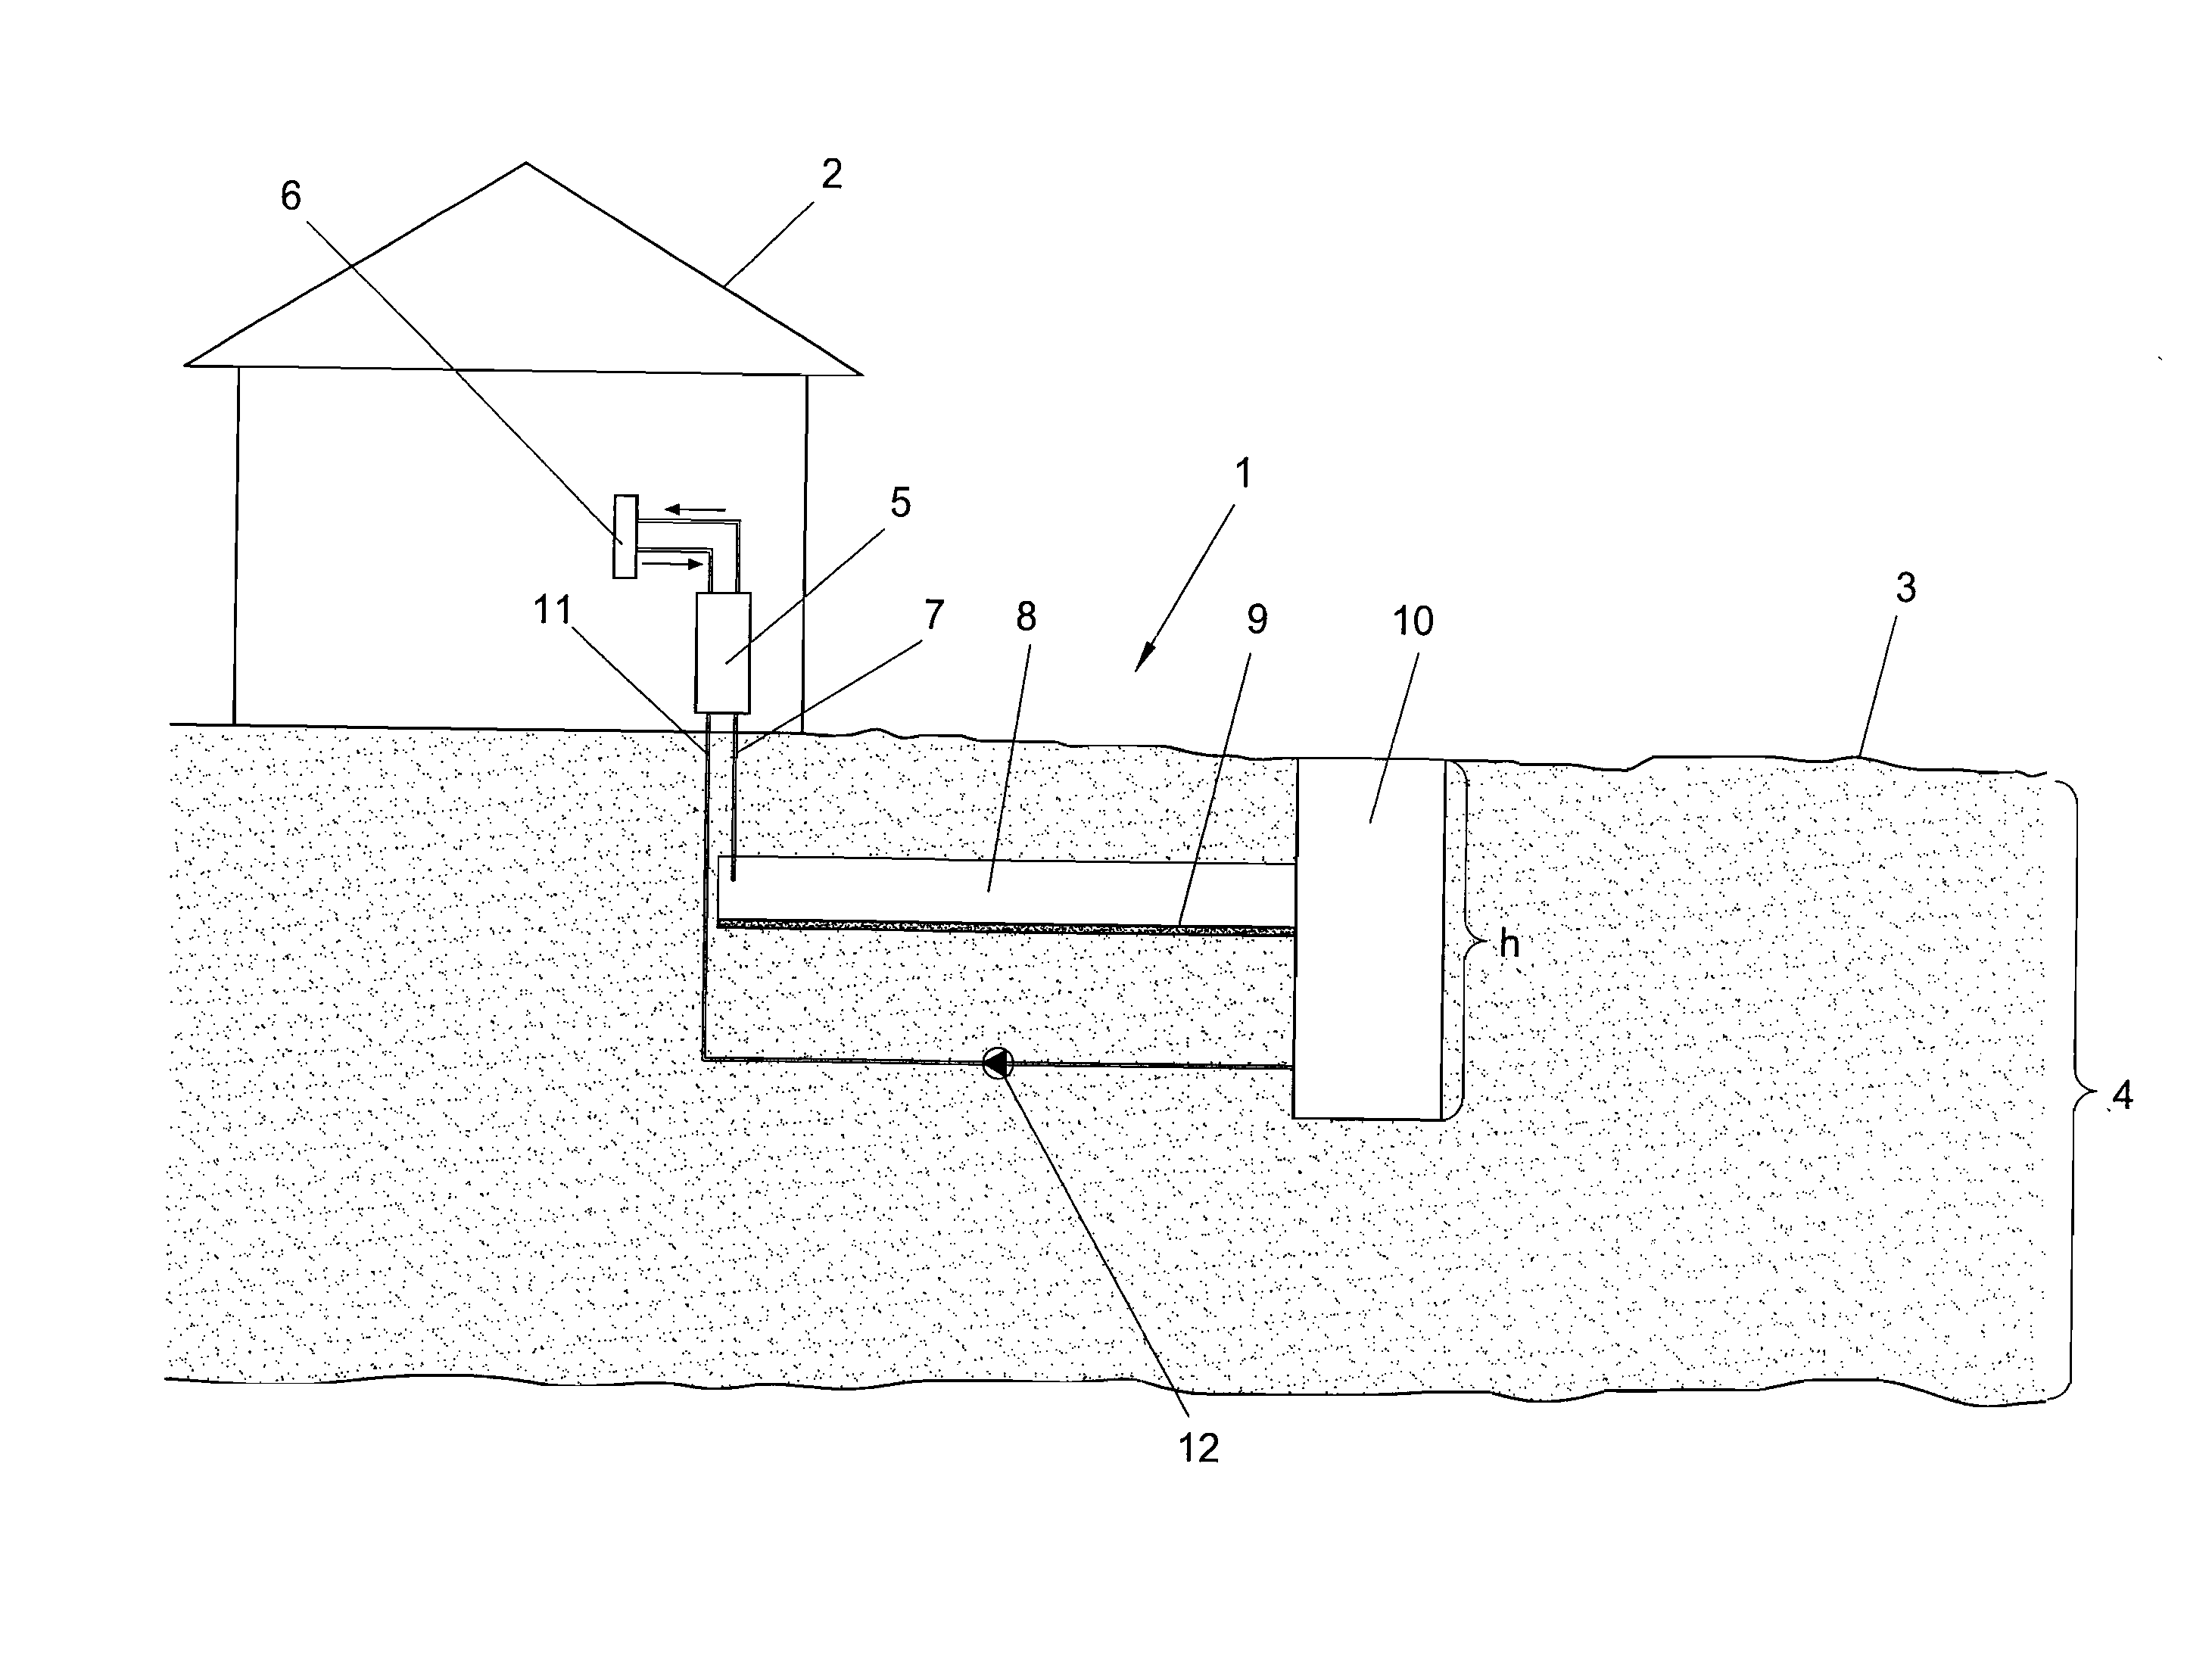 System for utilizing renewable geothermal energy